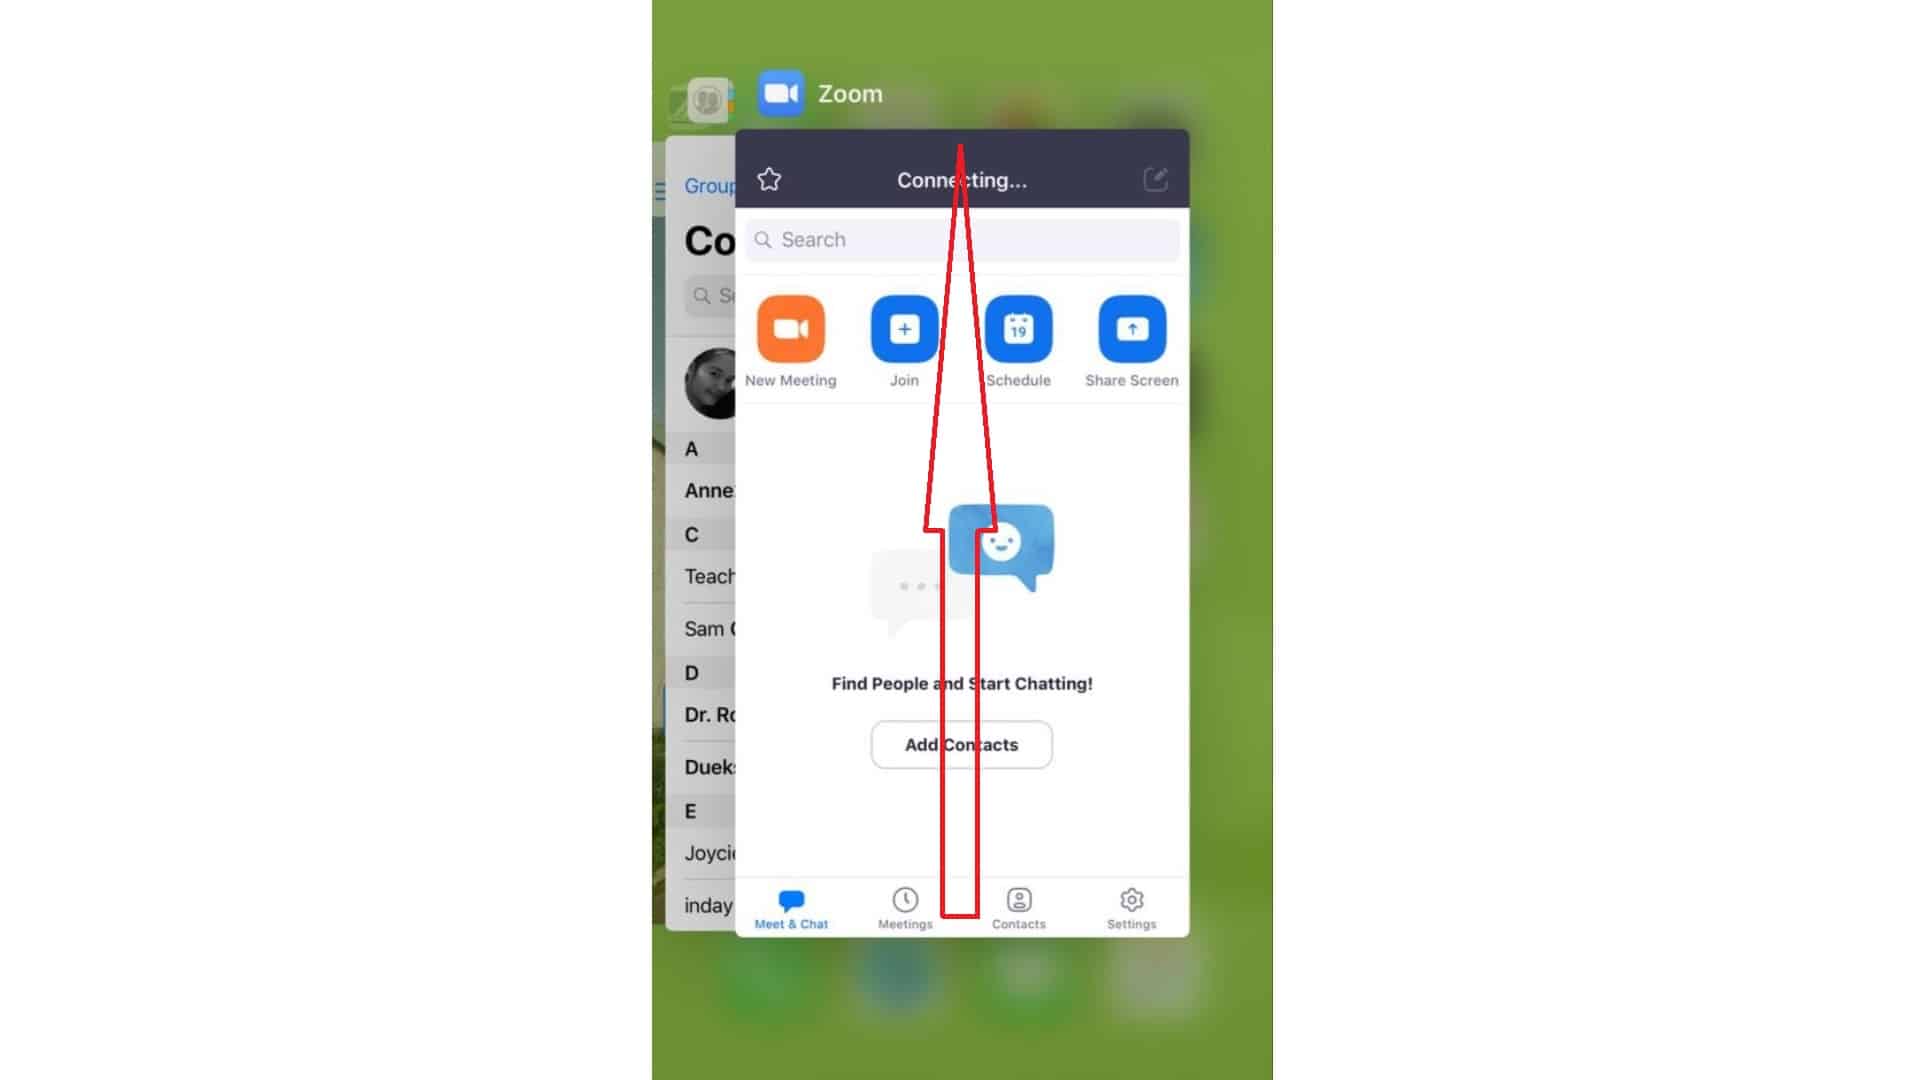 How-to-Fix-Zoom-that-Keeps-Crashing-After-iOS-13 (1)